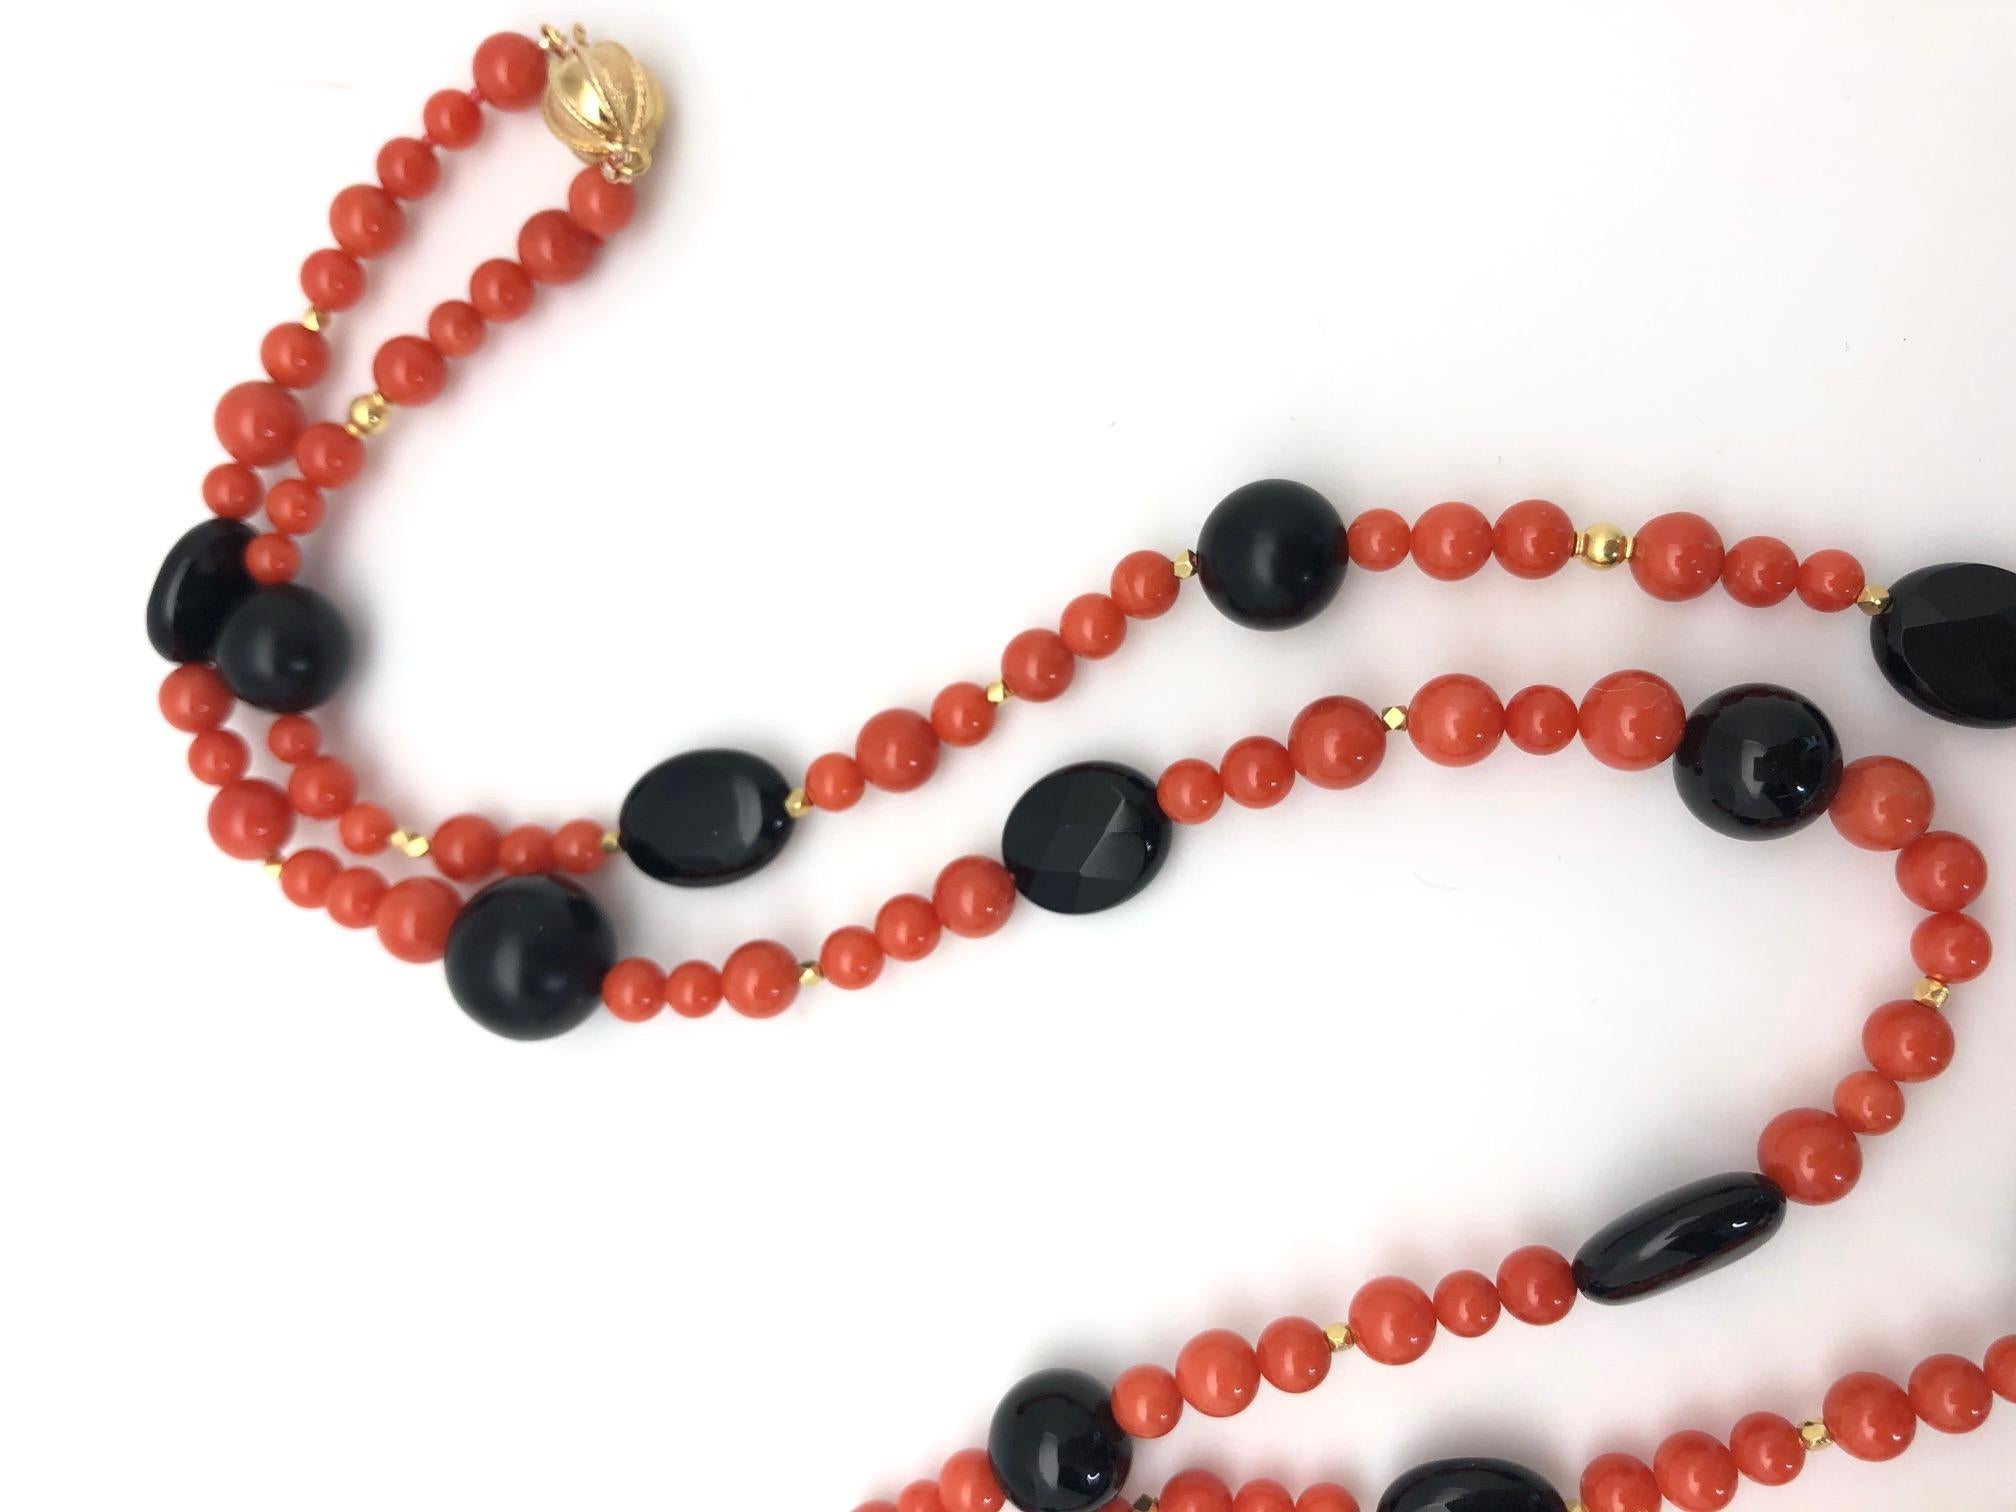 This elegant coral, onyx and gold beaded rope necklace offers both a dramatic color combination and a versatile length for endless possibilities. Round red coral beads in varying sizes are arranged with round and oval onyx beads in an eye-catching